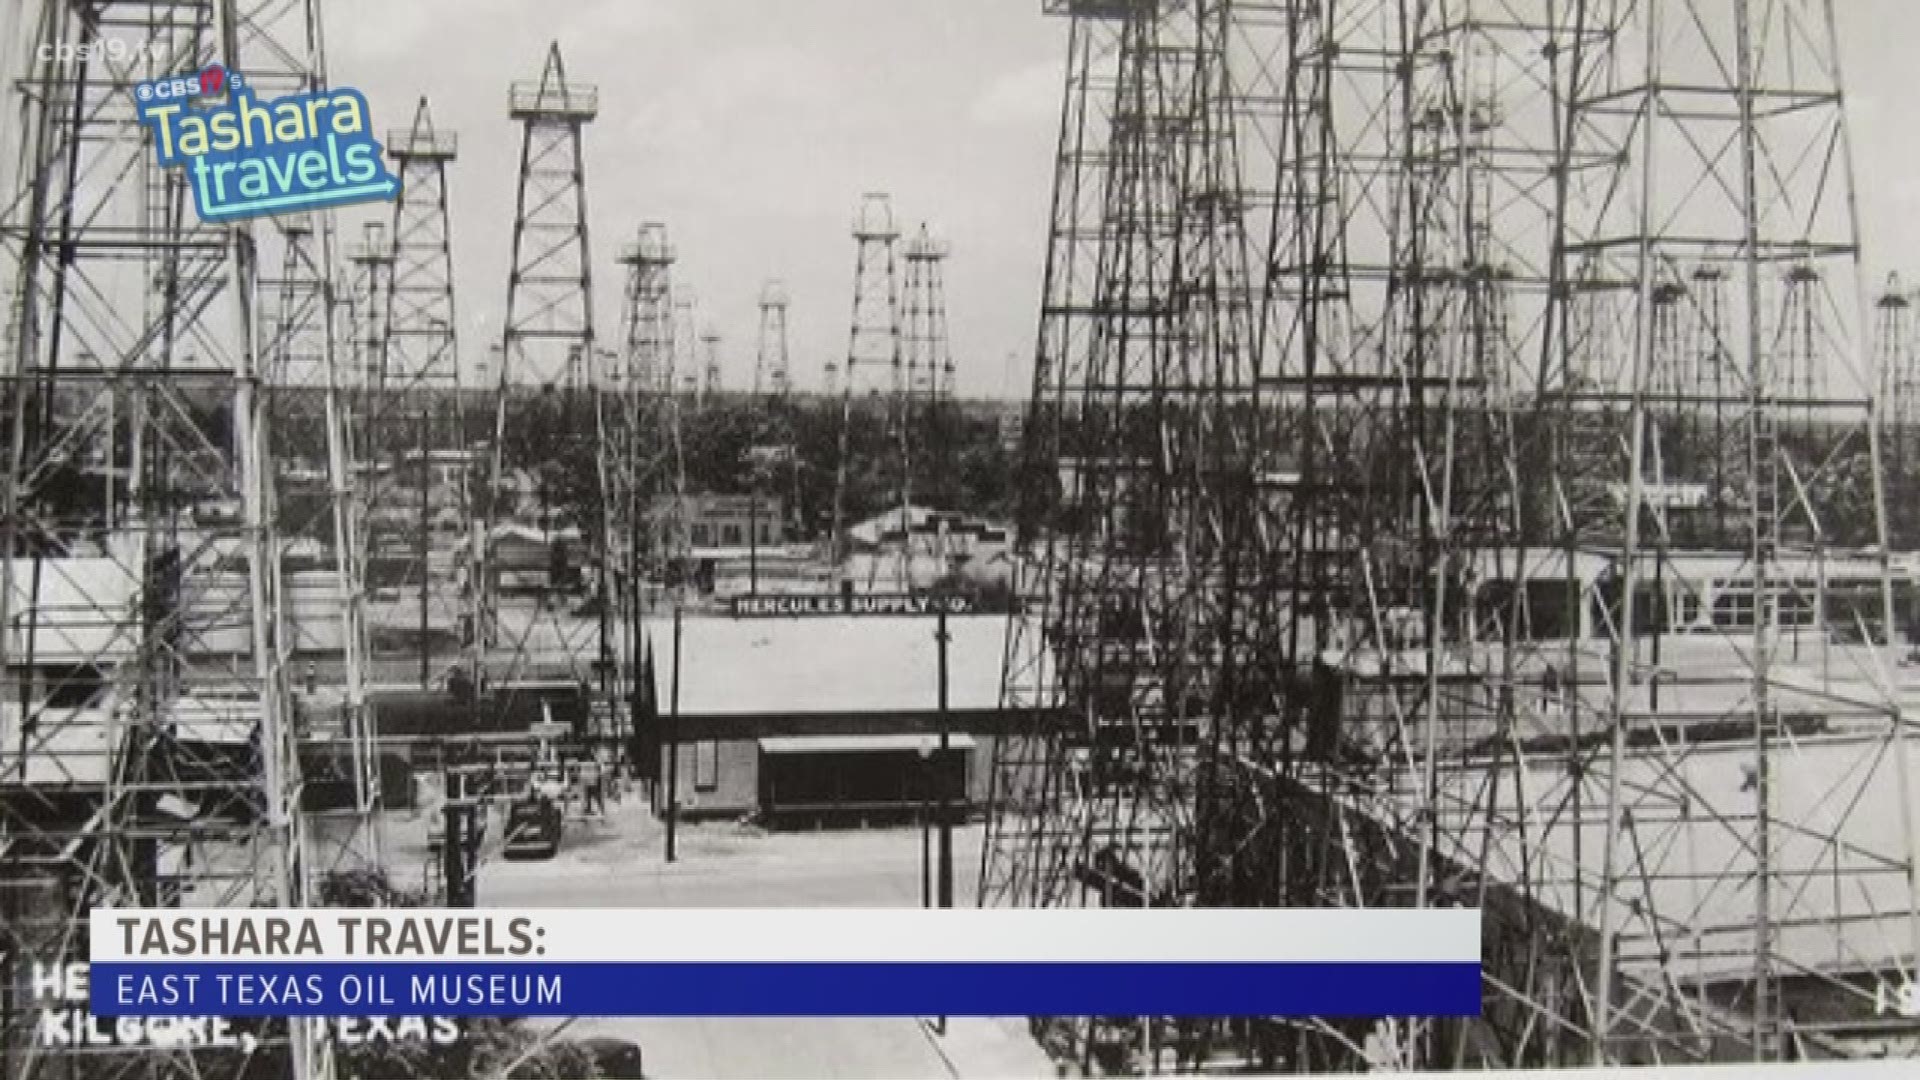 On this edition of Tashara Travels, we take you back in time to the early 1930's in Kilgore. It was there that one lucky oil prospector struck black gold and turned the town's fortunes around almost overnight.